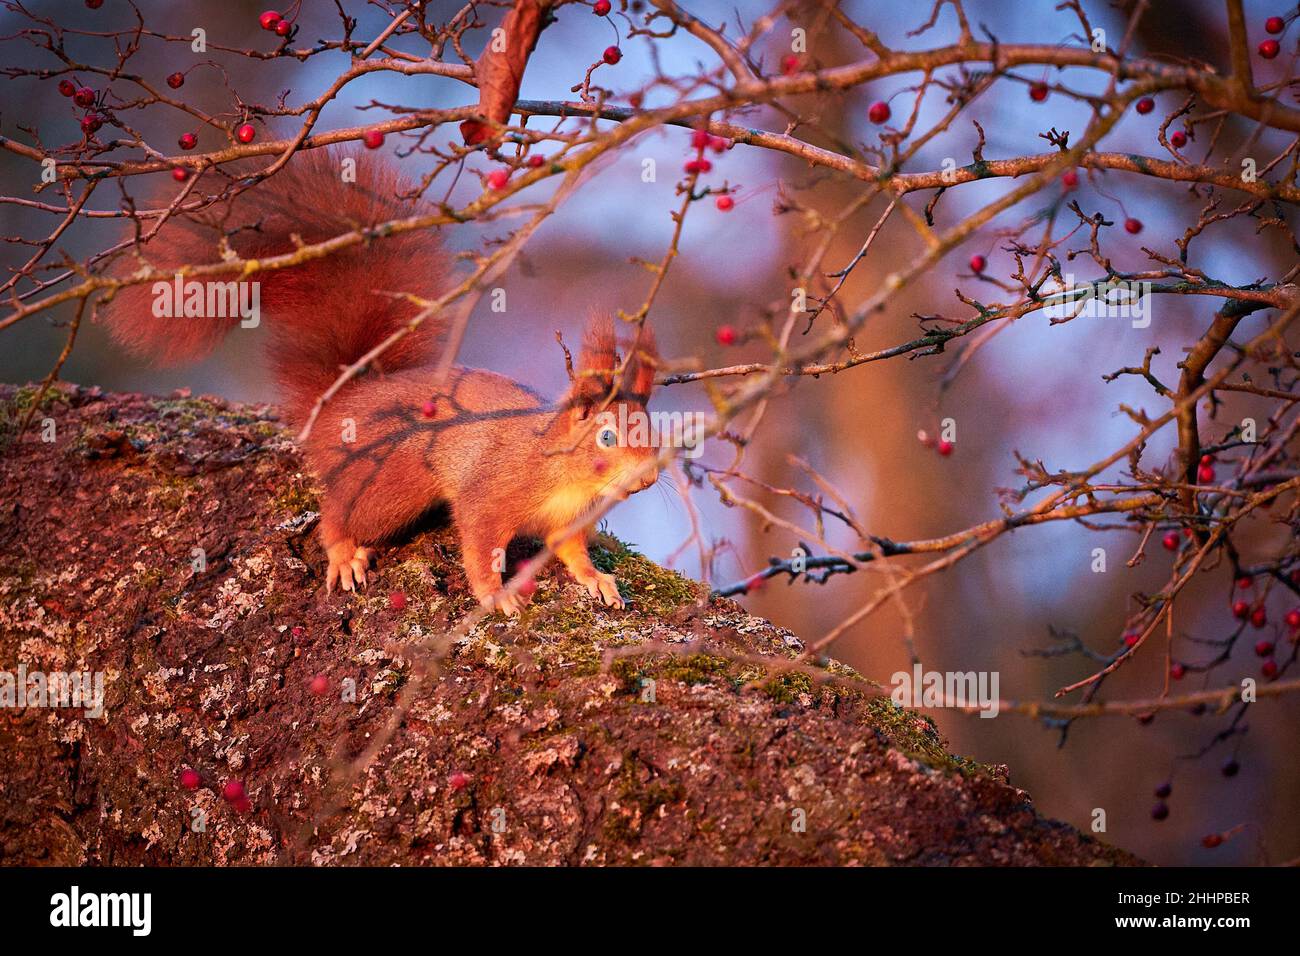 Squirrel on moss-covered tree in the red sunset. Red squirrel sitting on a tree in the forest. Beautiful squirrels. Animal in the nature habitat. Stock Photo